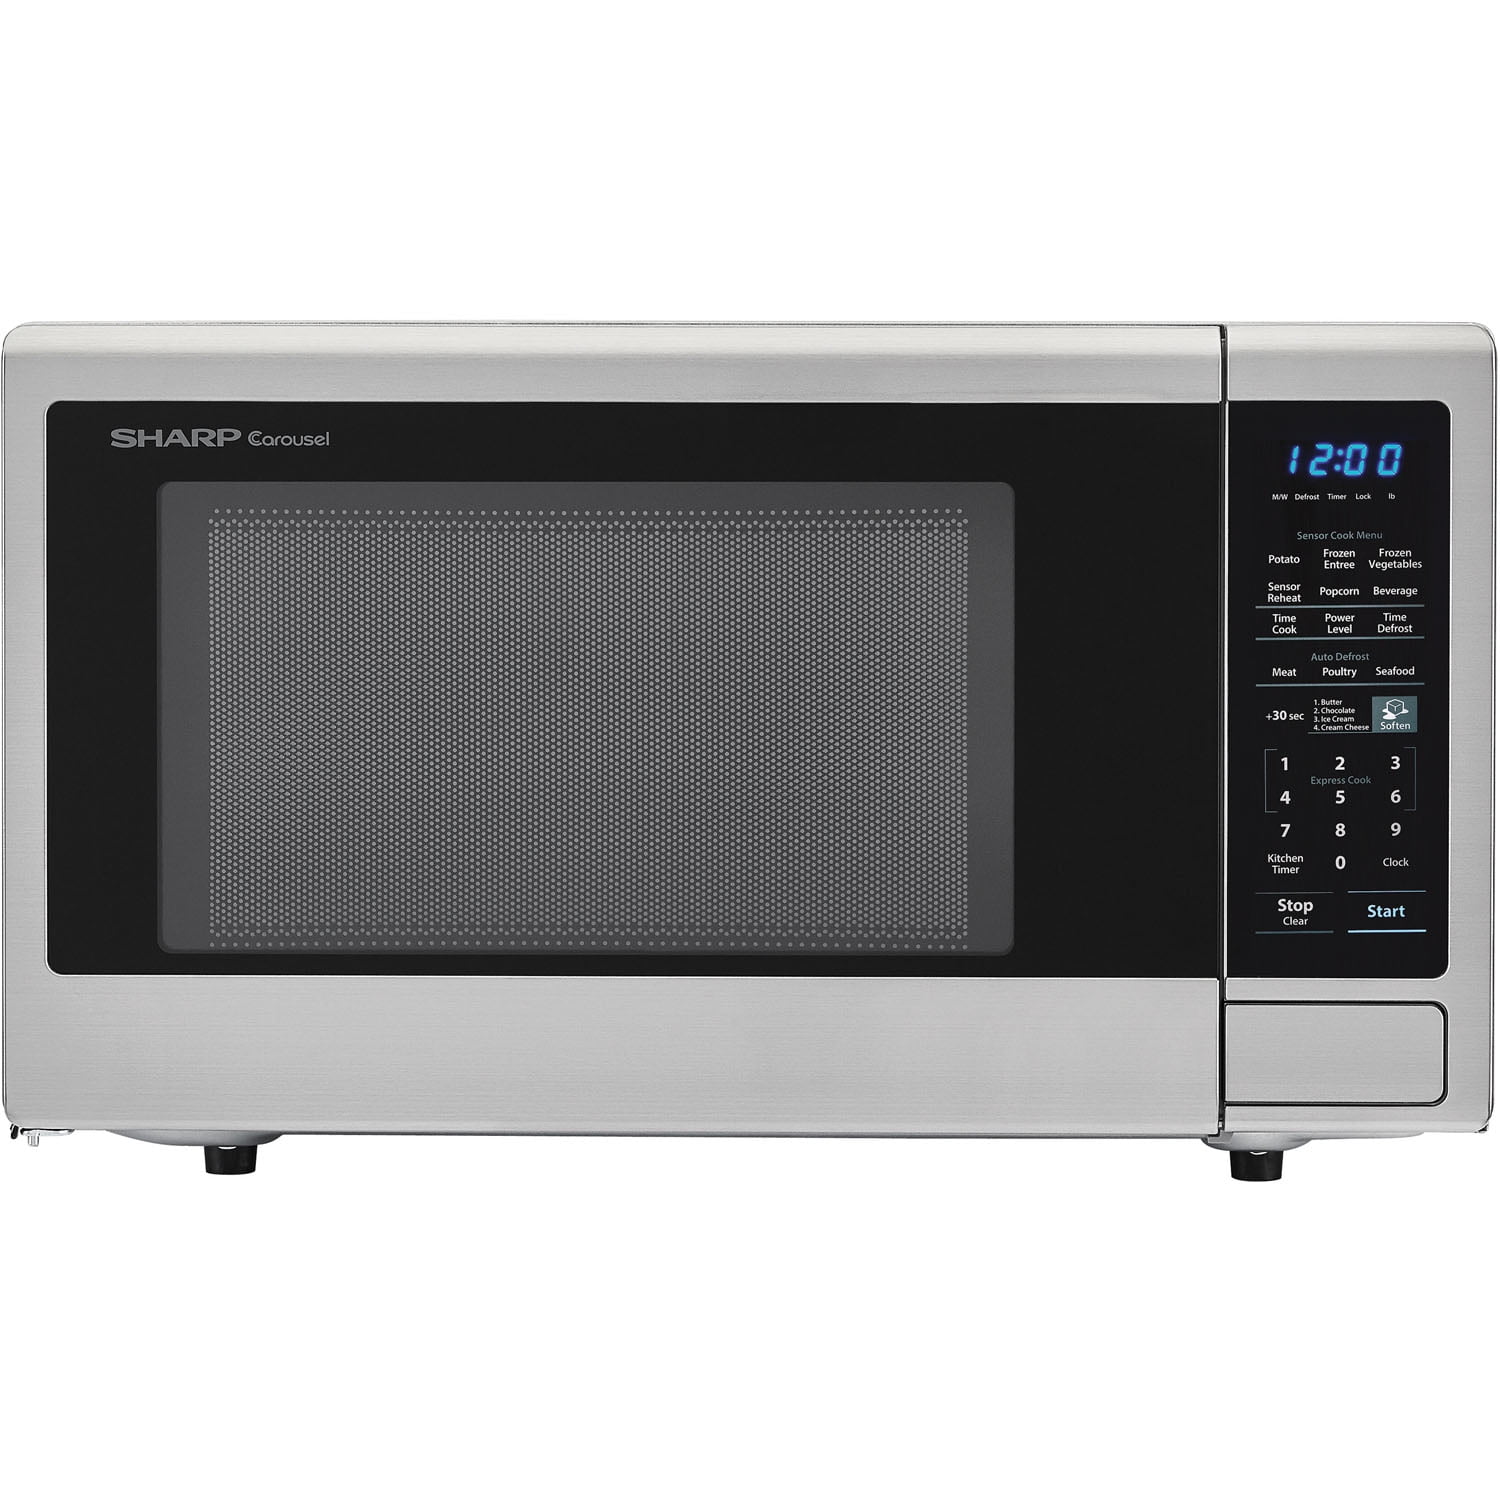 Ft 1000W Countertop Microwave Oven with Orville Redenbachers Popcorn Preset Carousel 1.4 Cu